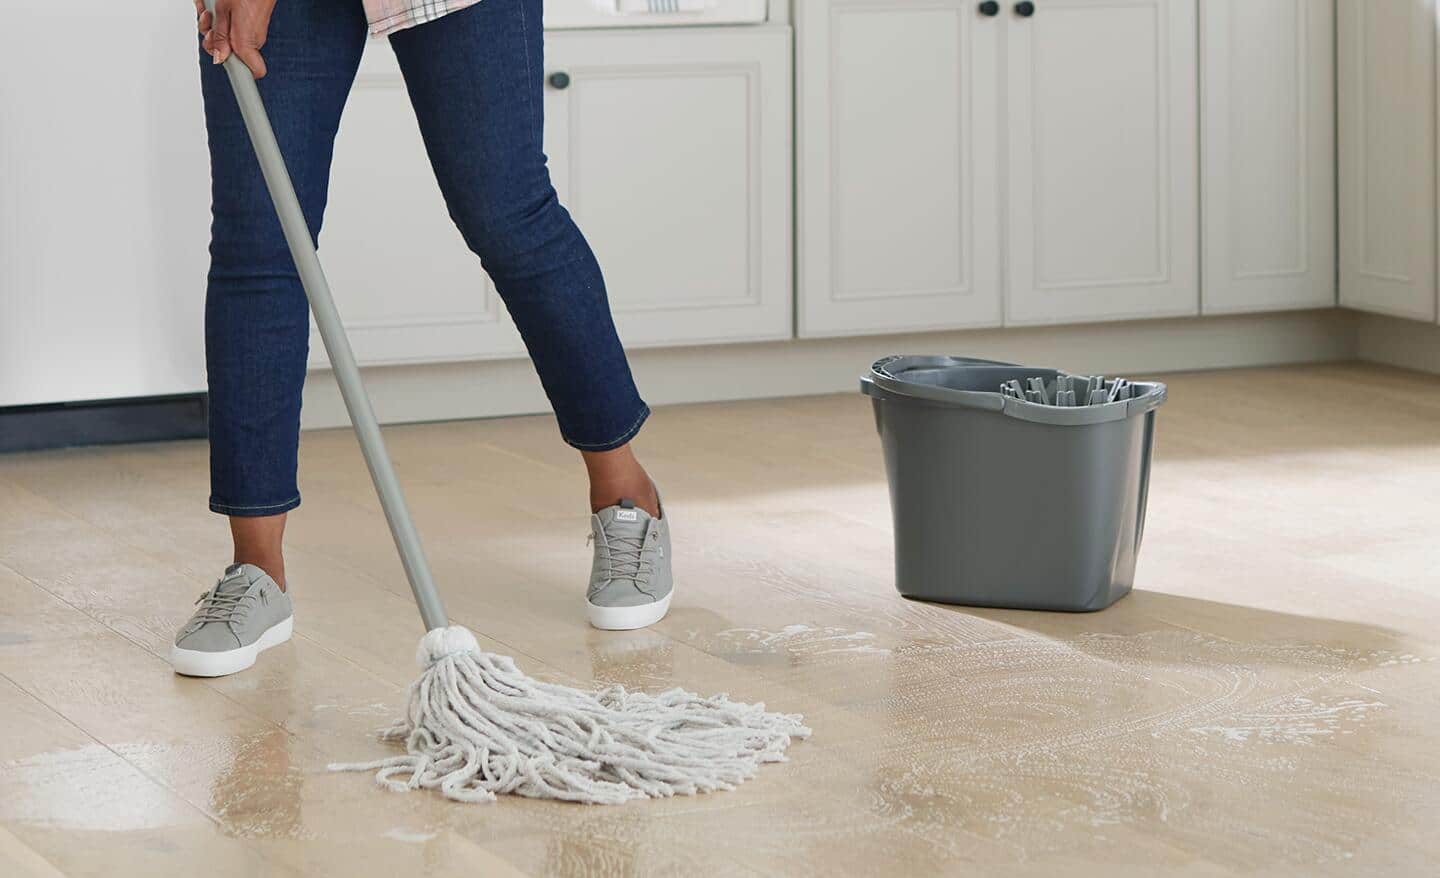 A person using a string mop to clean a kitchen floor.